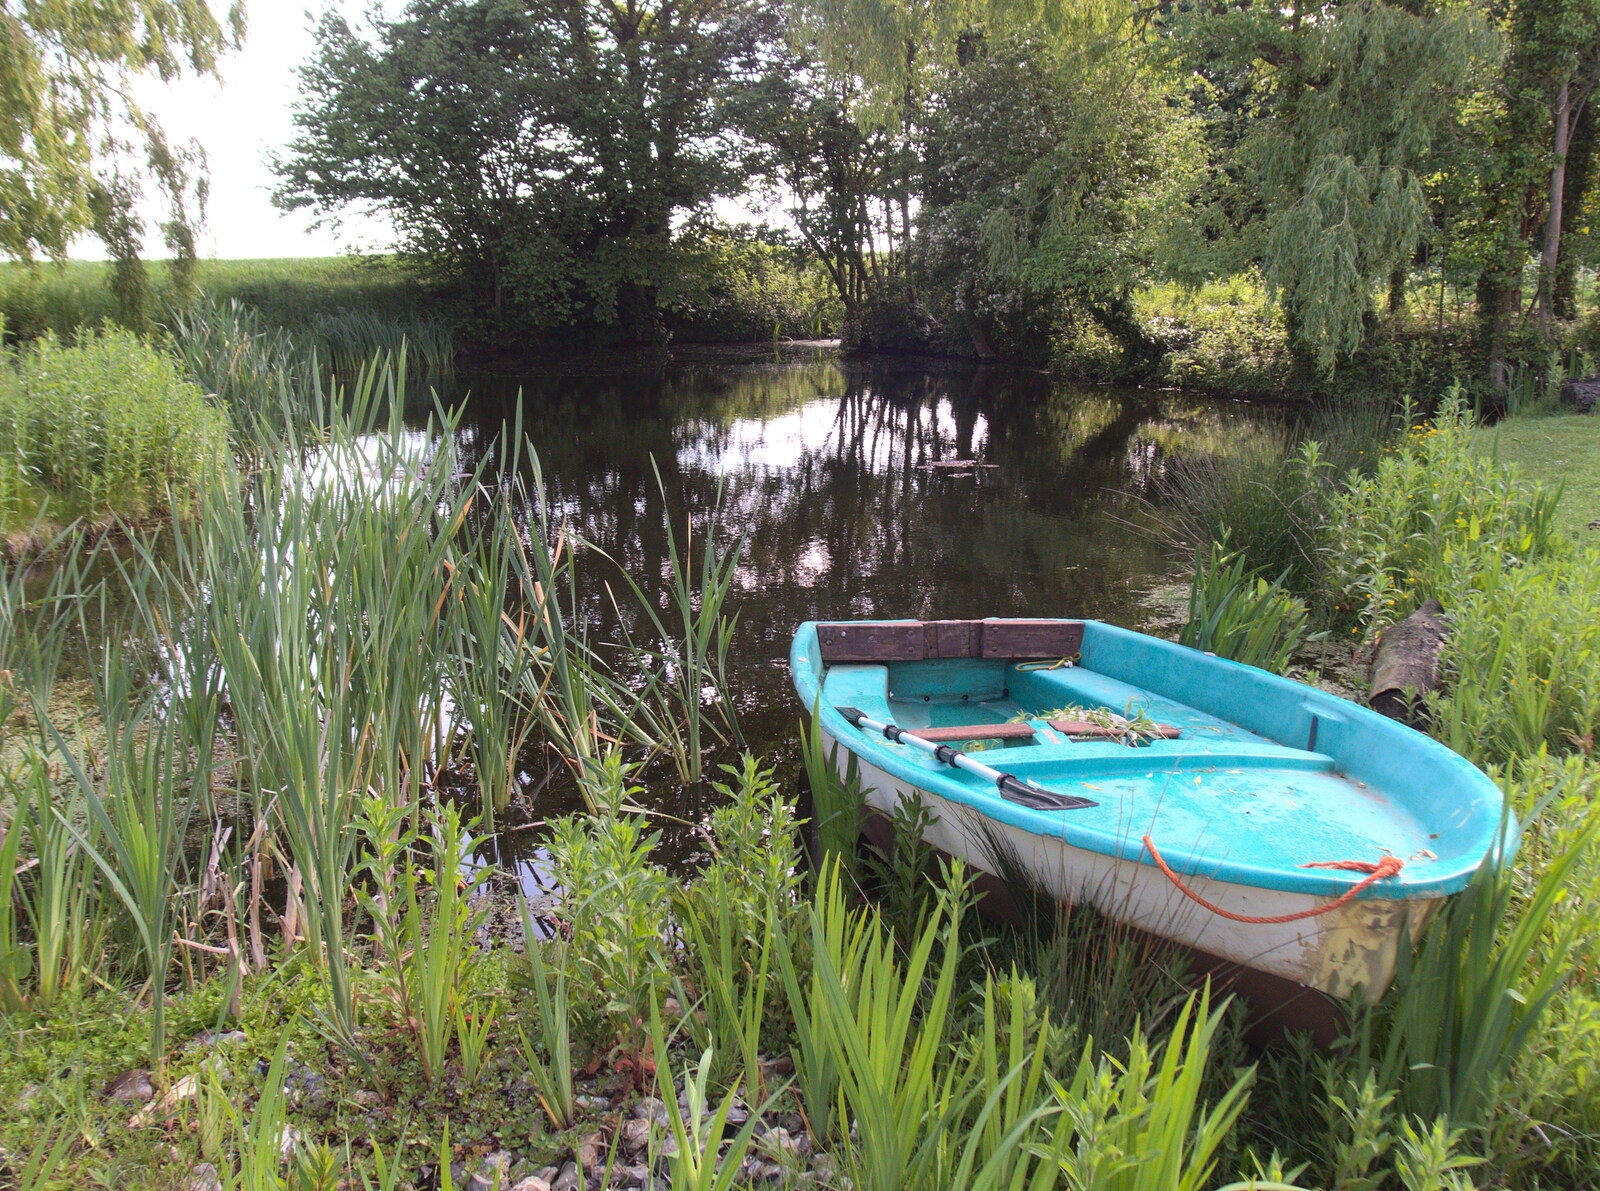 The boat on the pond from Clive and Suzanne's Party, Braisworth, Suffolk - 21st May 2017